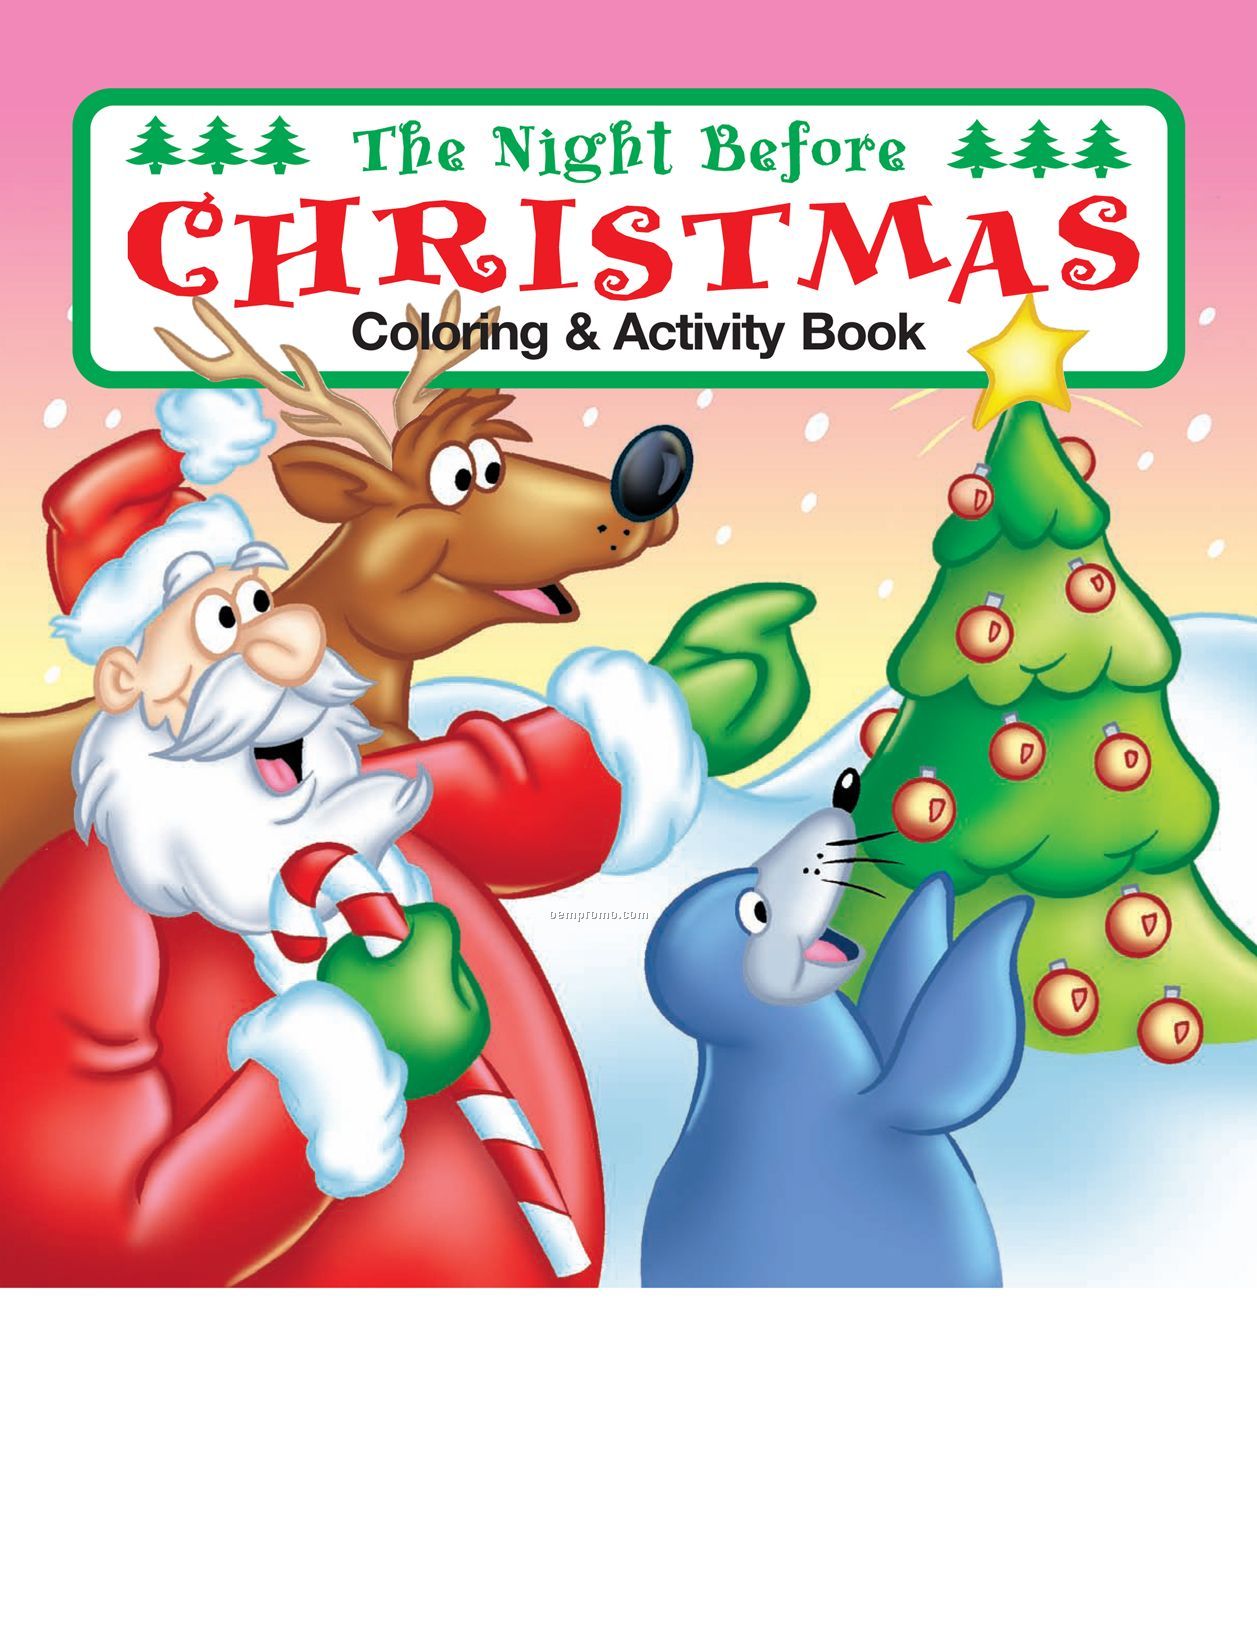 The Night Before Christmas Coloring Book Fun Pack